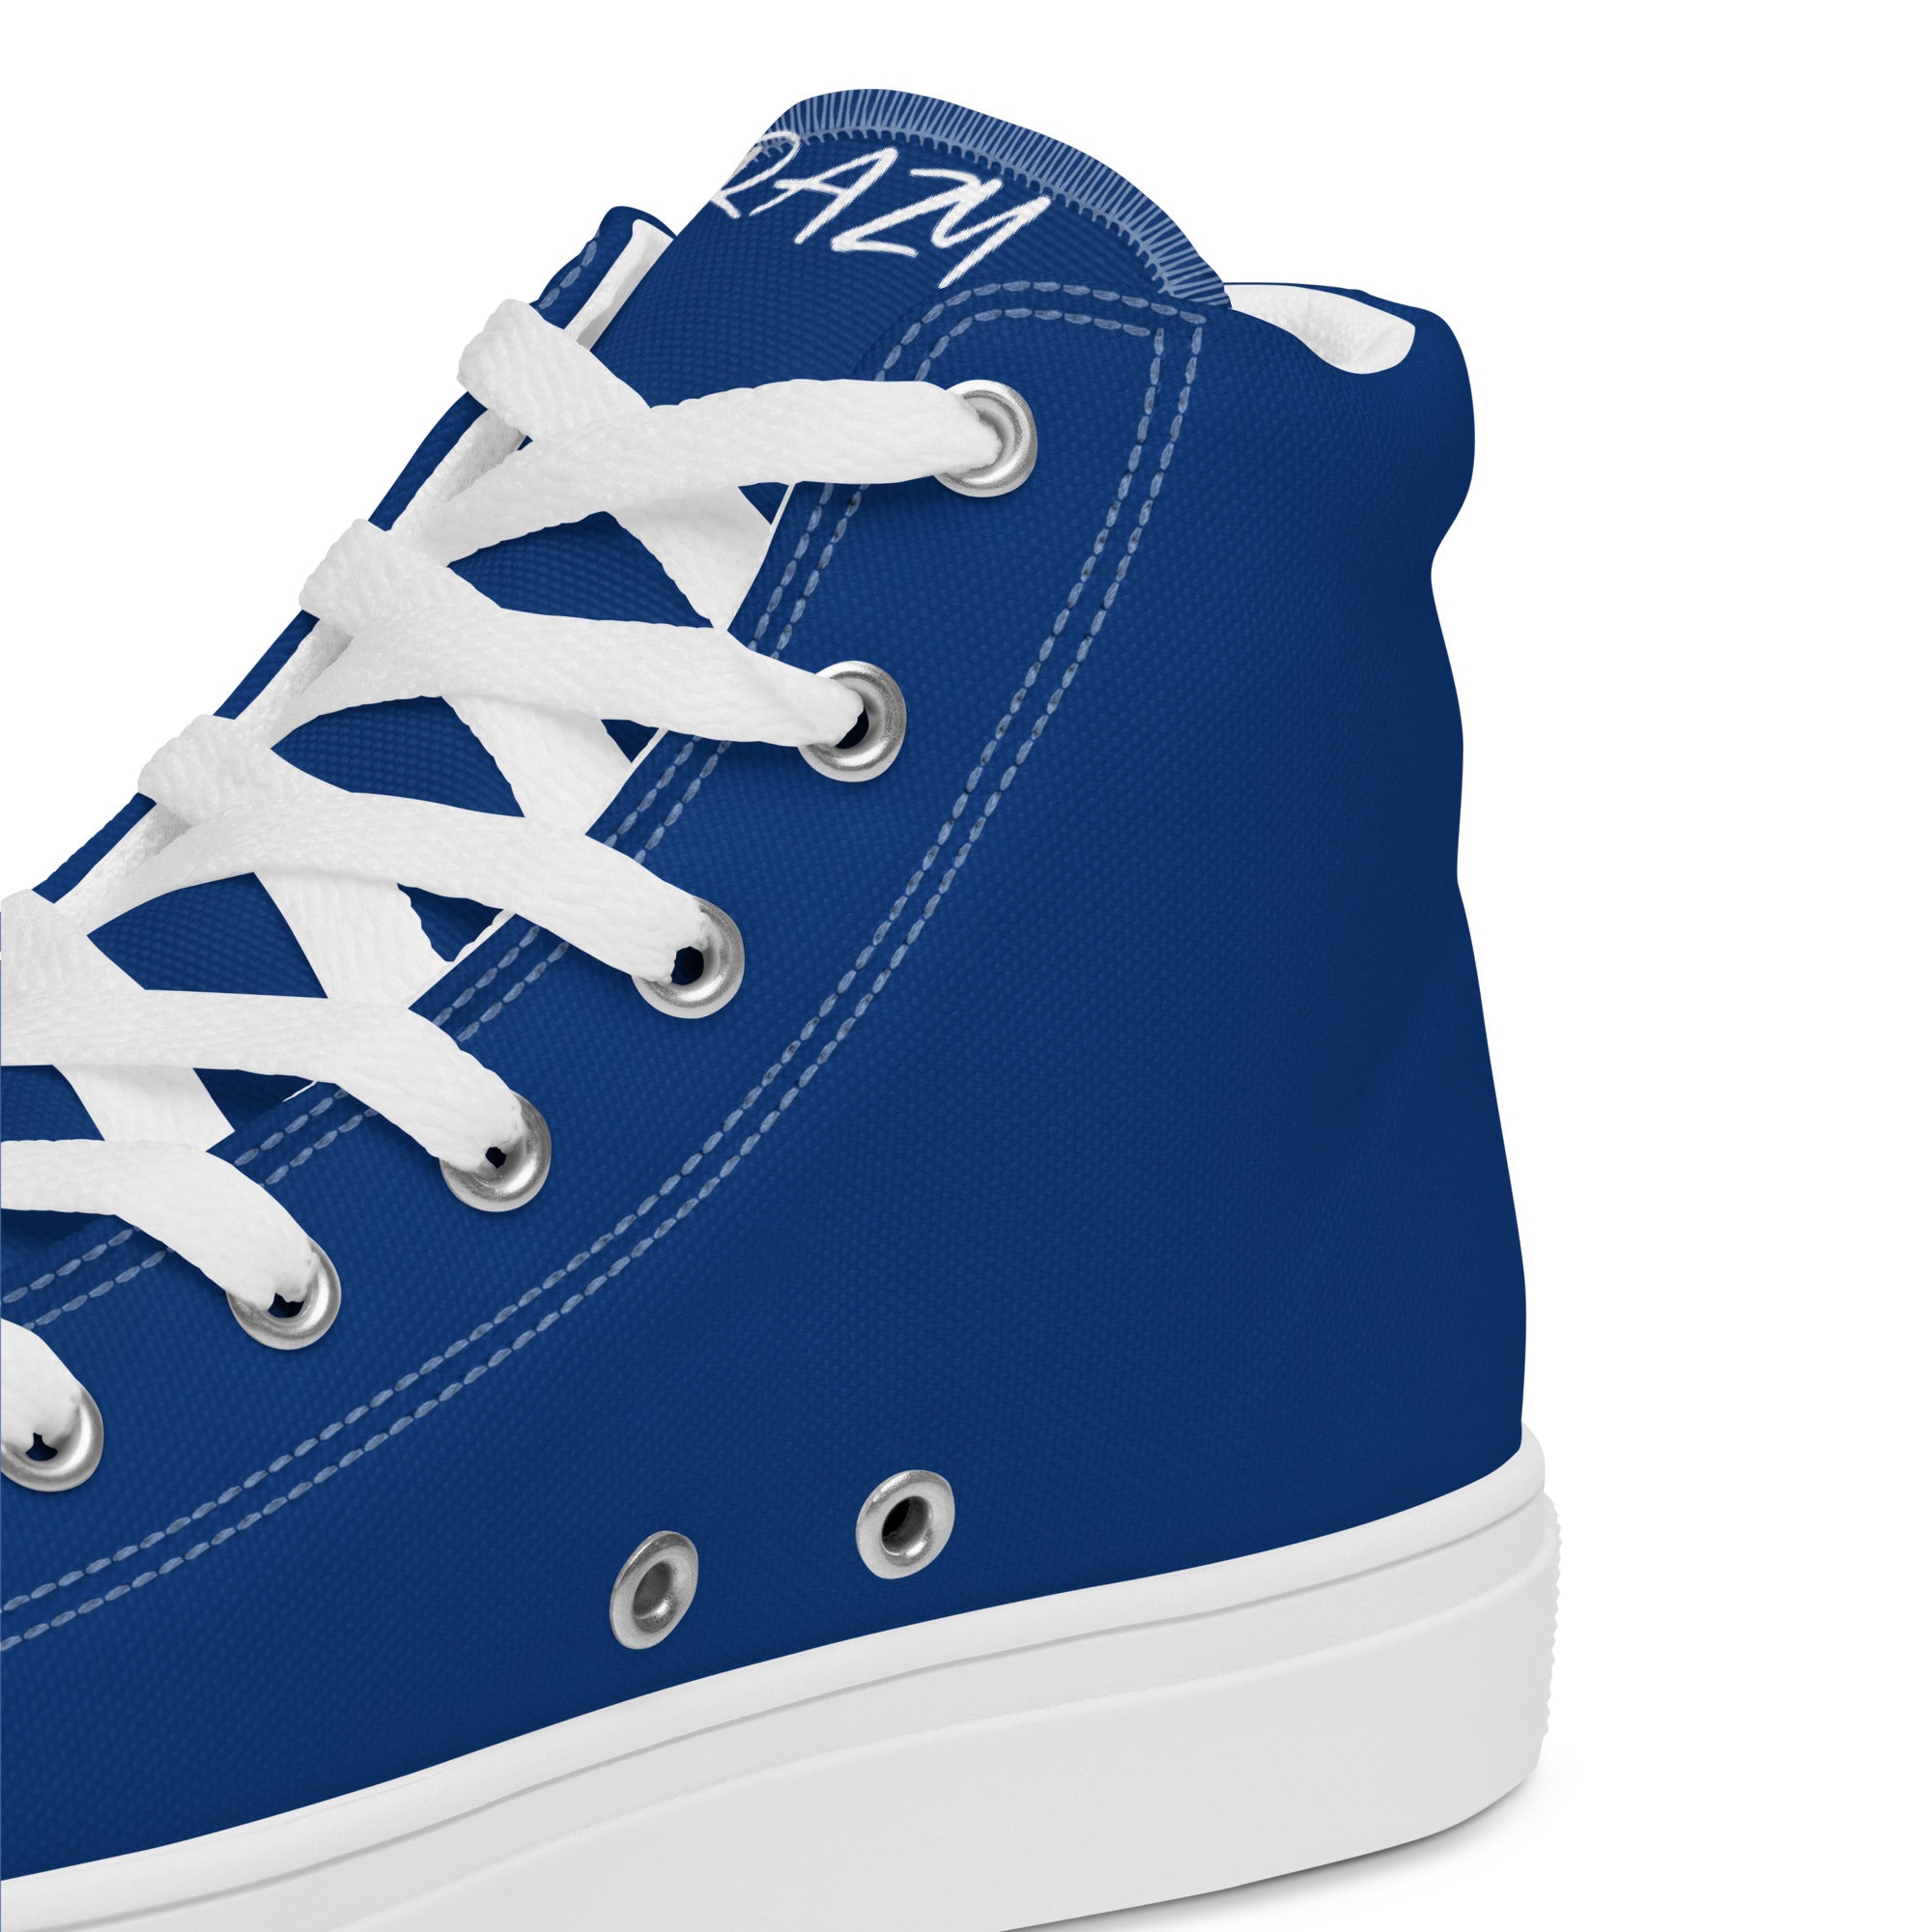 Women's blue canvas high-top sneakers 'SAY MY NAME'